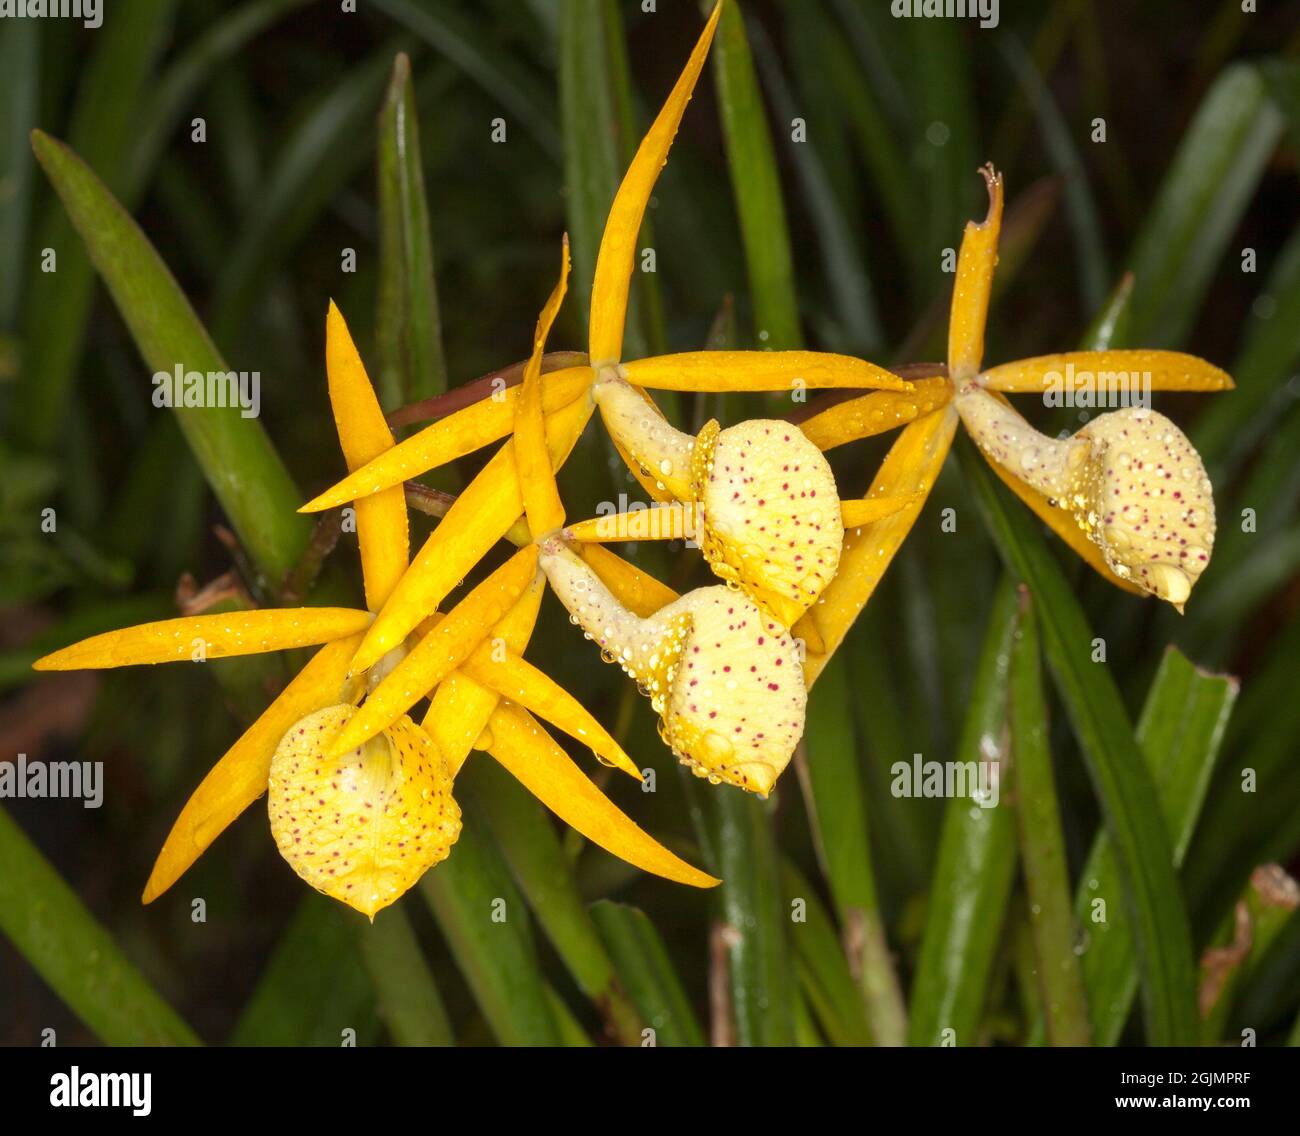 Cluster of unusual yellow flowers of orchid, Brassocattleya 'Yellow Bird' .with raindrops on petals and against background of plant's green foliage Stock Photo